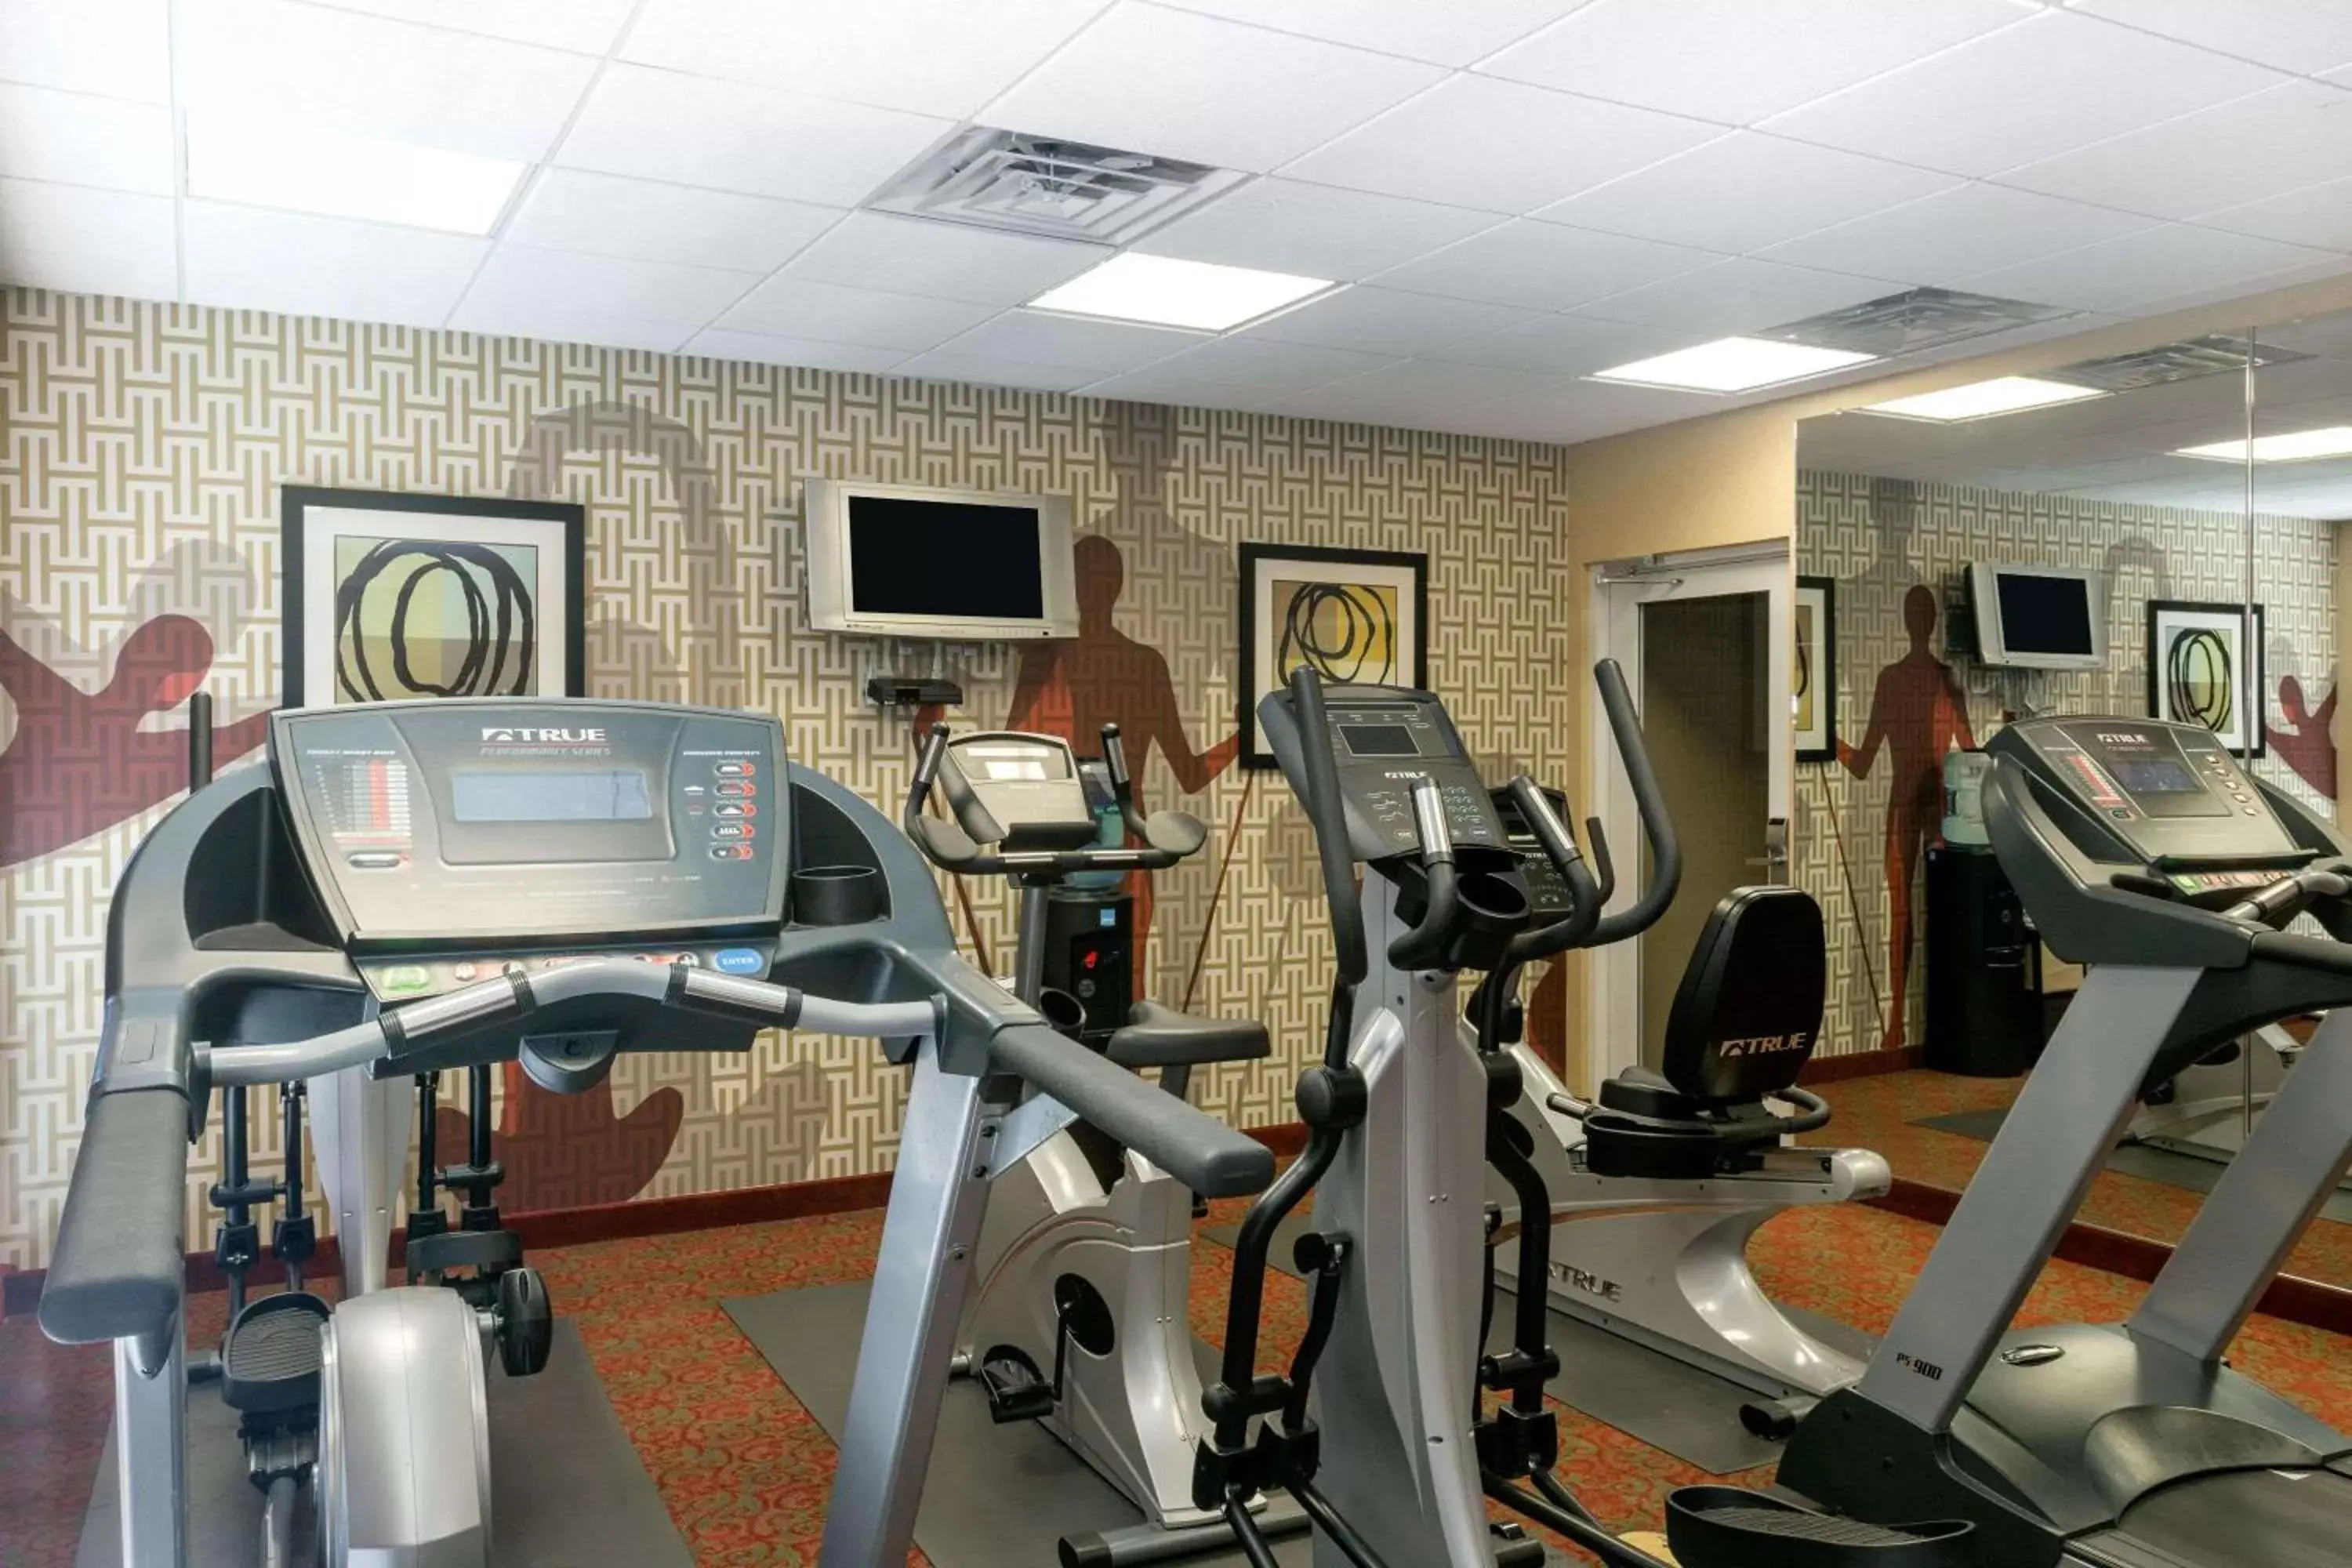 Fitness centre/facilities, Fitness Center/Facilities in Hawthorn Suites by Wyndham - Kingsland, I-95 & Kings Bay Naval Base Area